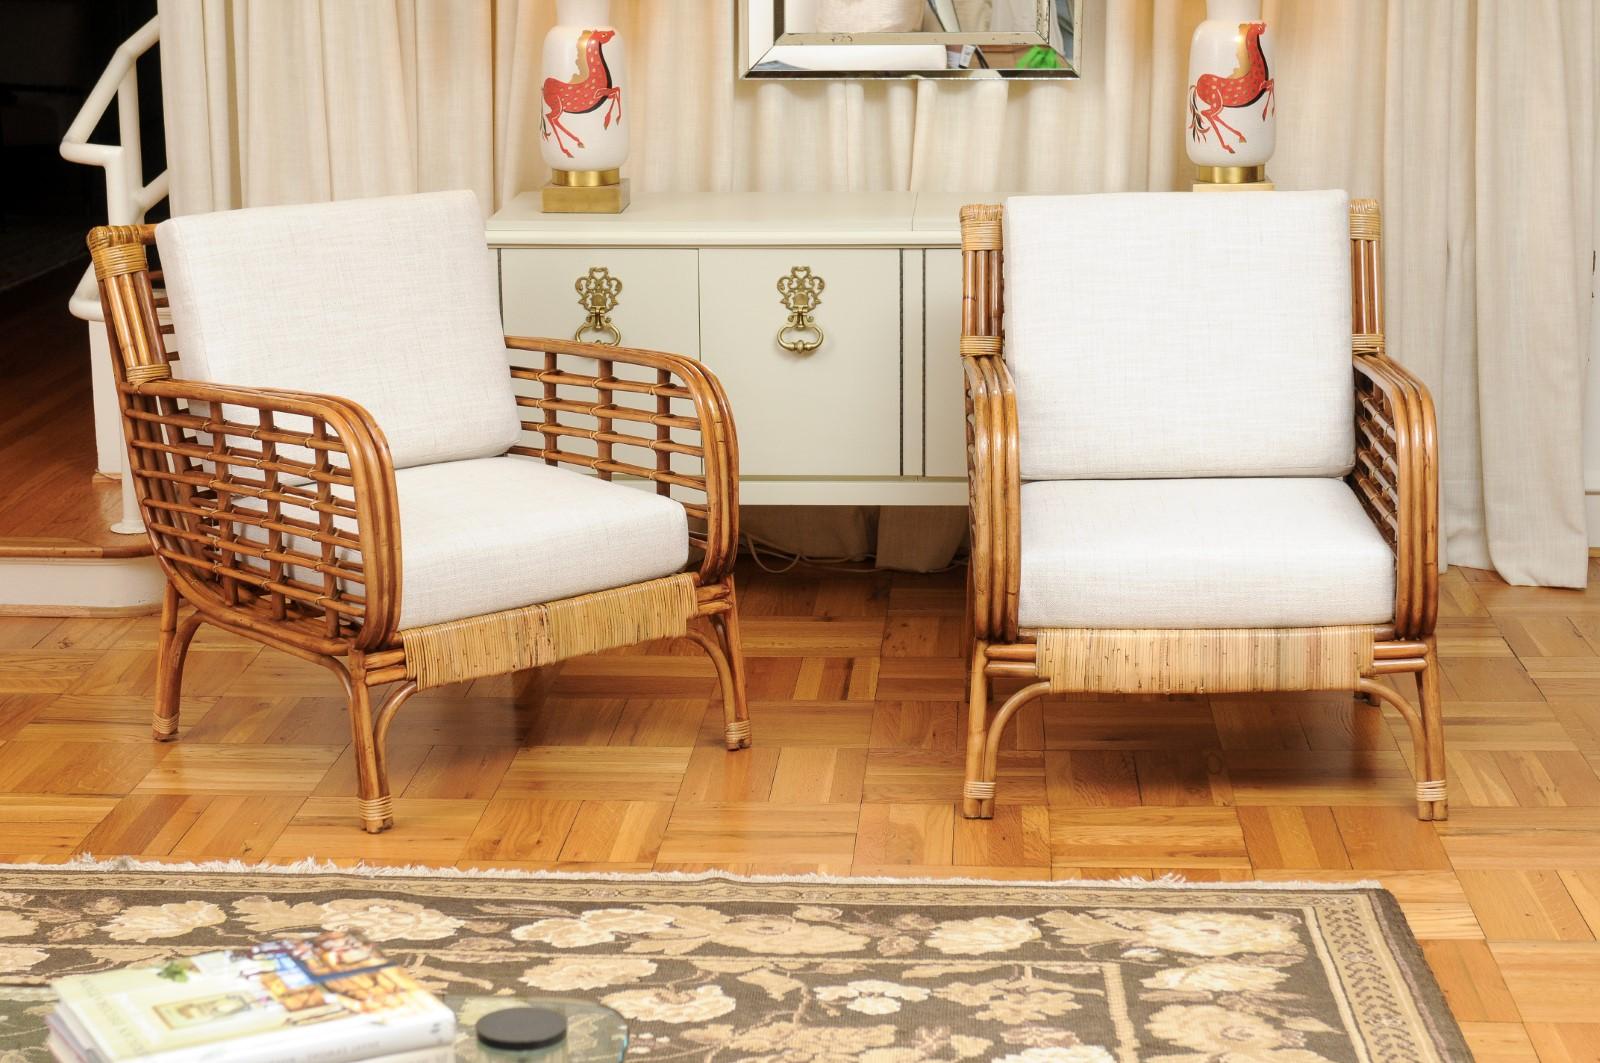 These magnificent lounge chairs are shipped as professionally photographed and described in the listing narrative: Meticulously professionally restored and installation ready. Expert custom upholstery service is available.

A fabulous set of four